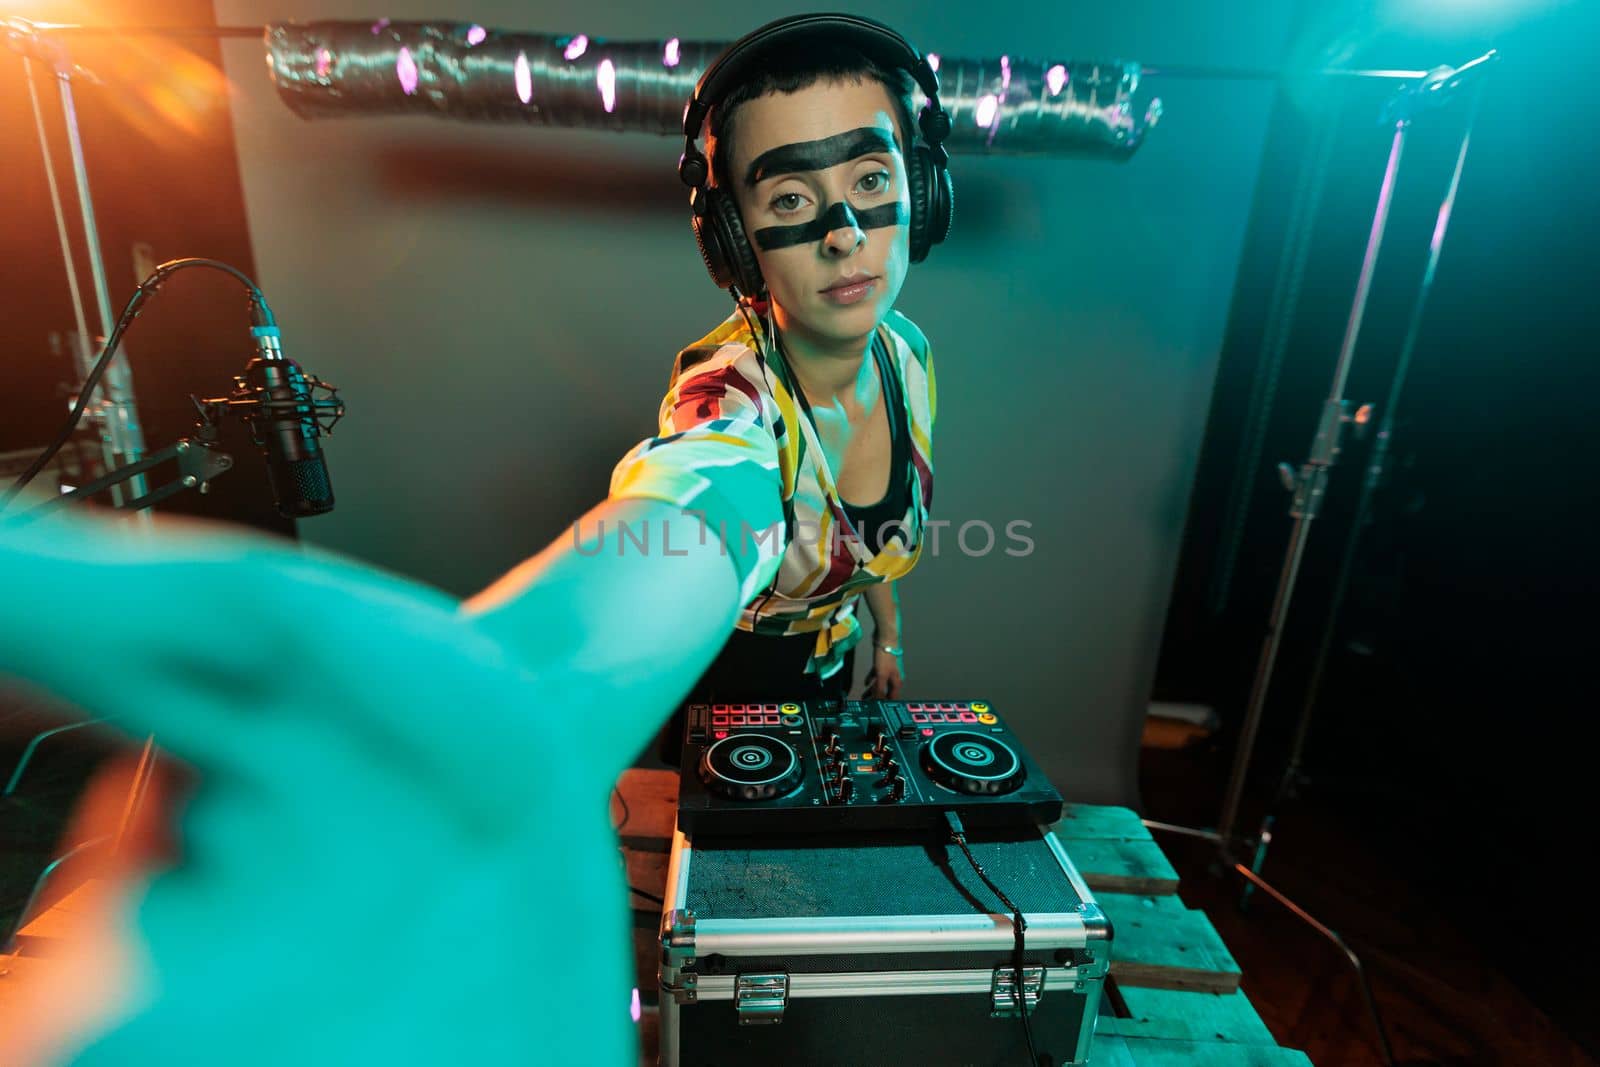 Disc jockey using turntables to mix music by DCStudio